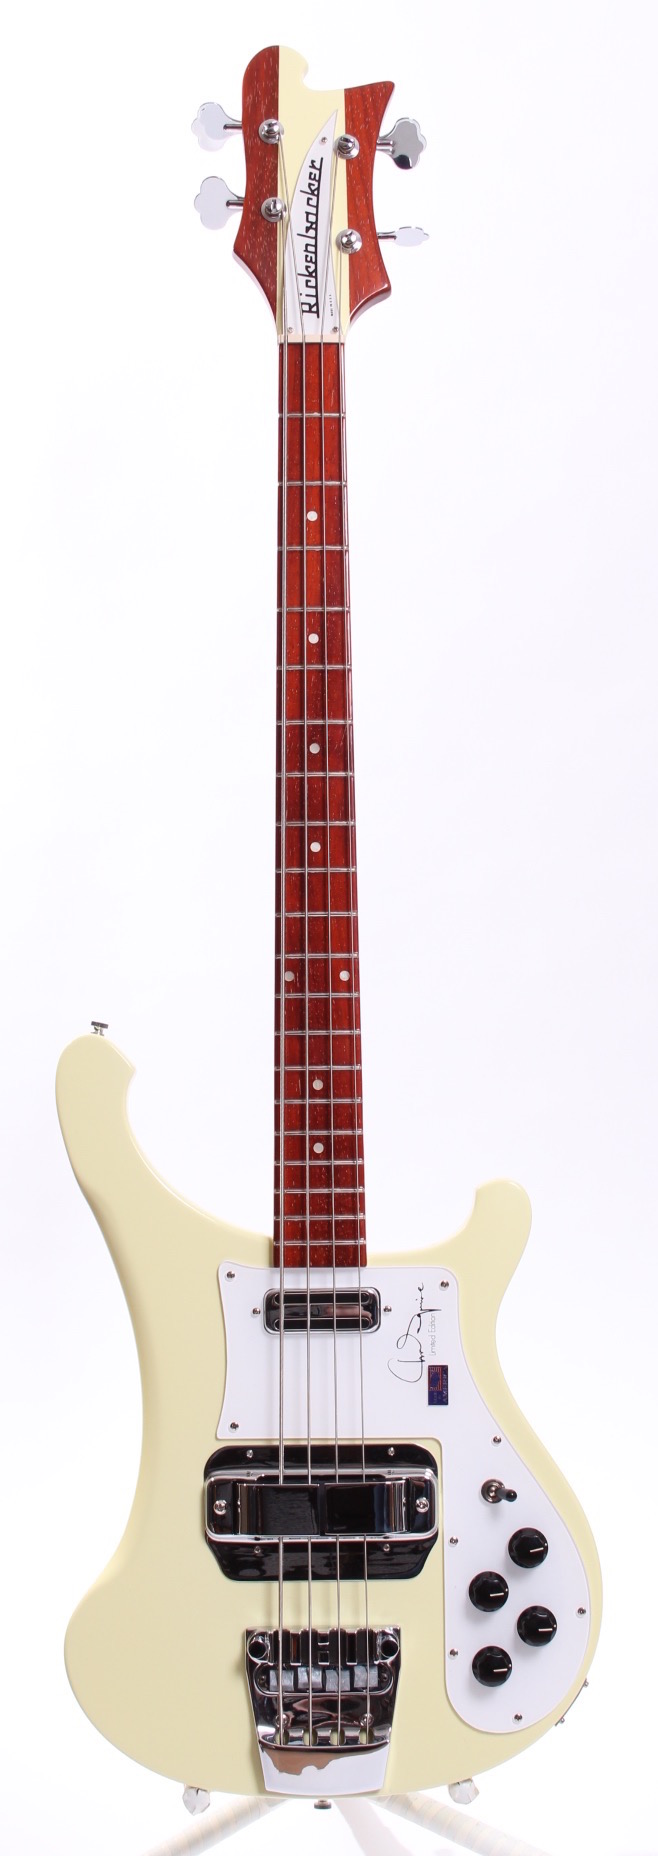 chris squire rickenbacker bass for sale